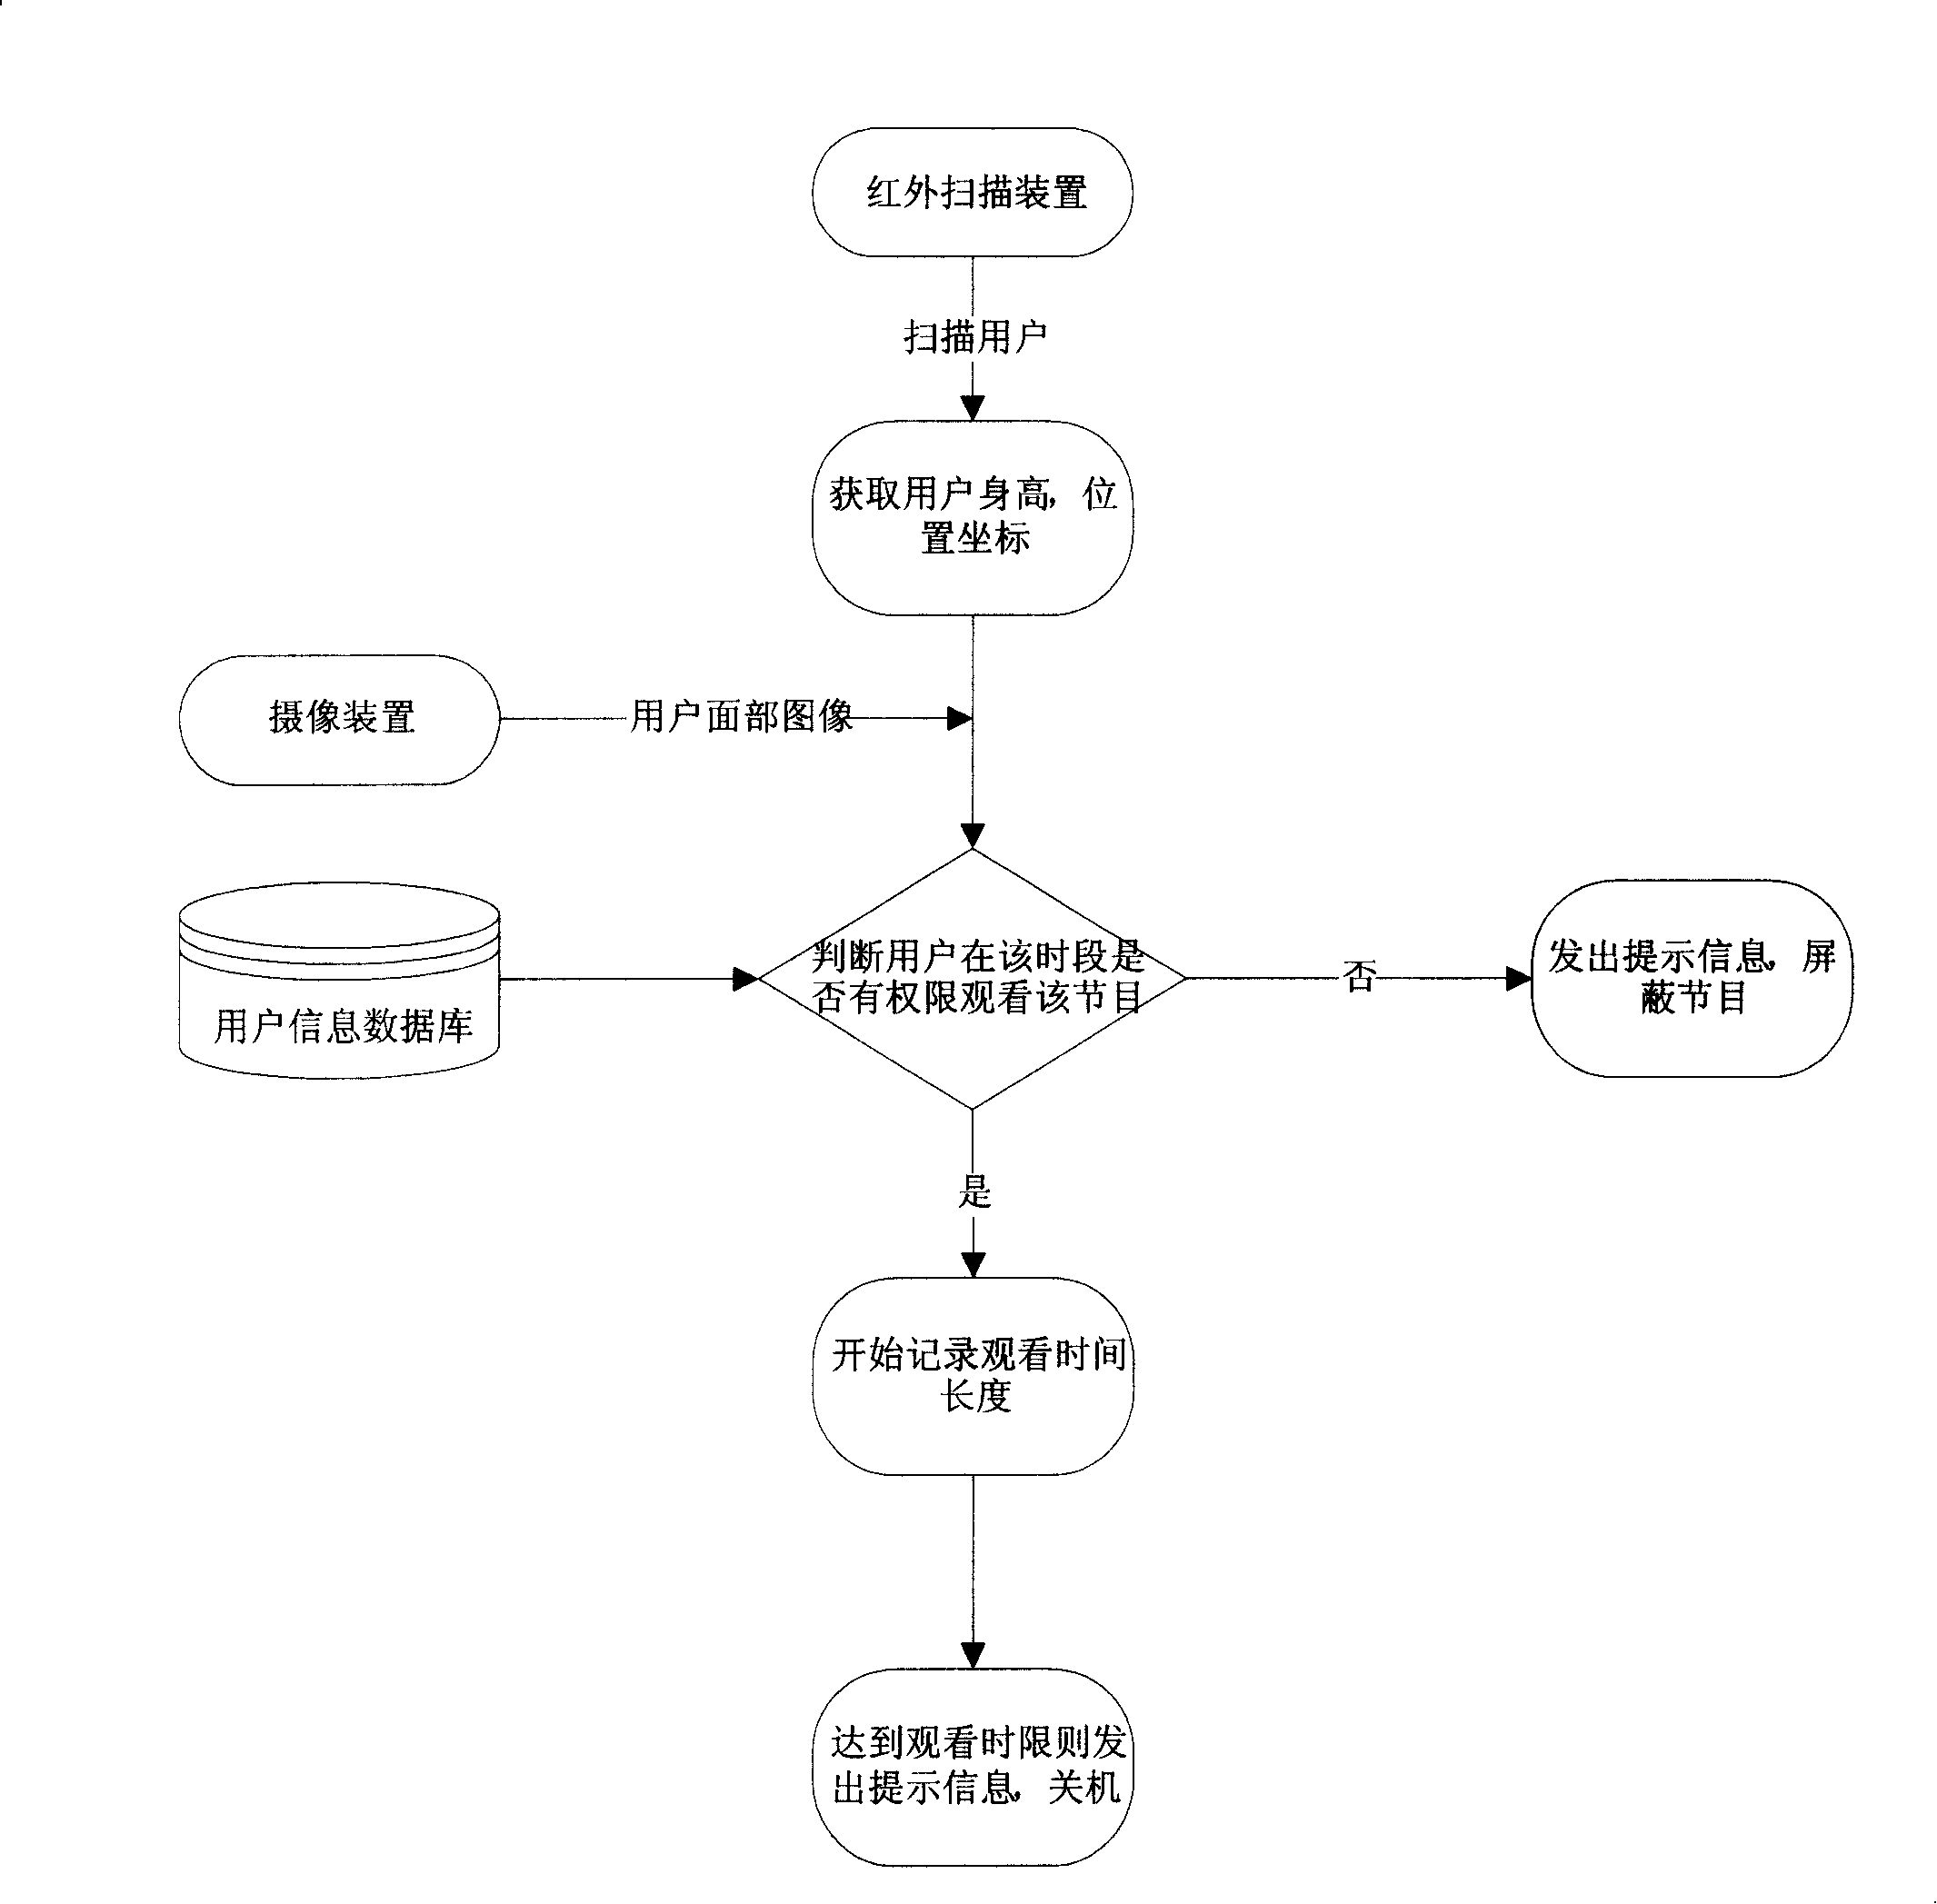 Device of controlling receiving destance and authority for digital TV set